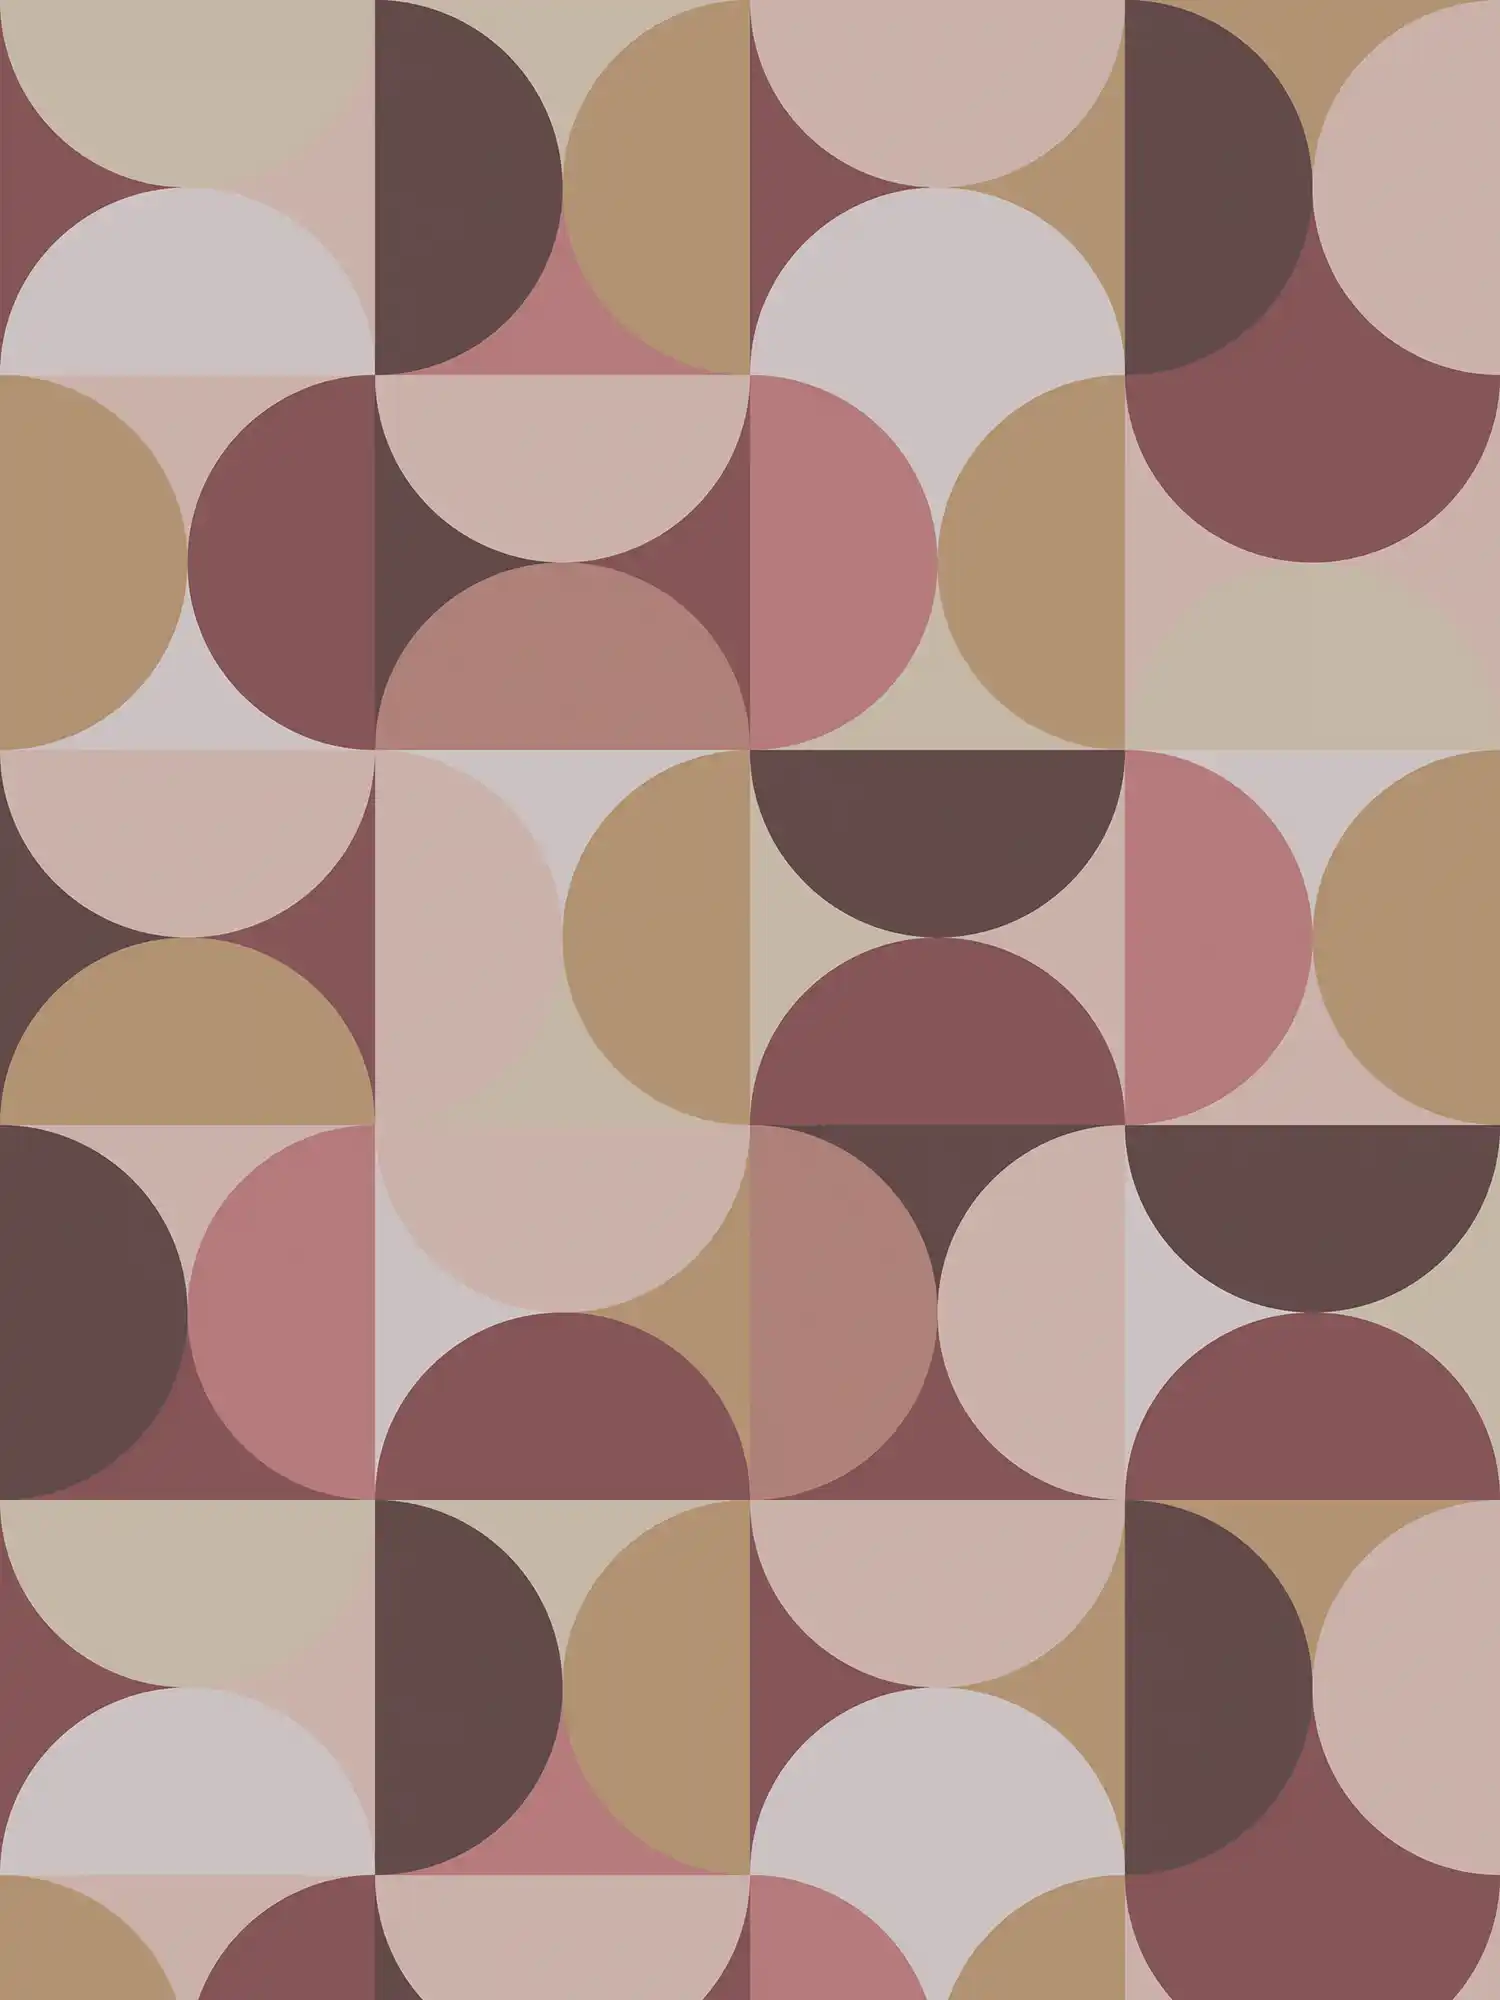 Graphic Semi-Circle Pattern Wallpaper in Retro 70s Style - Beige, Pink
